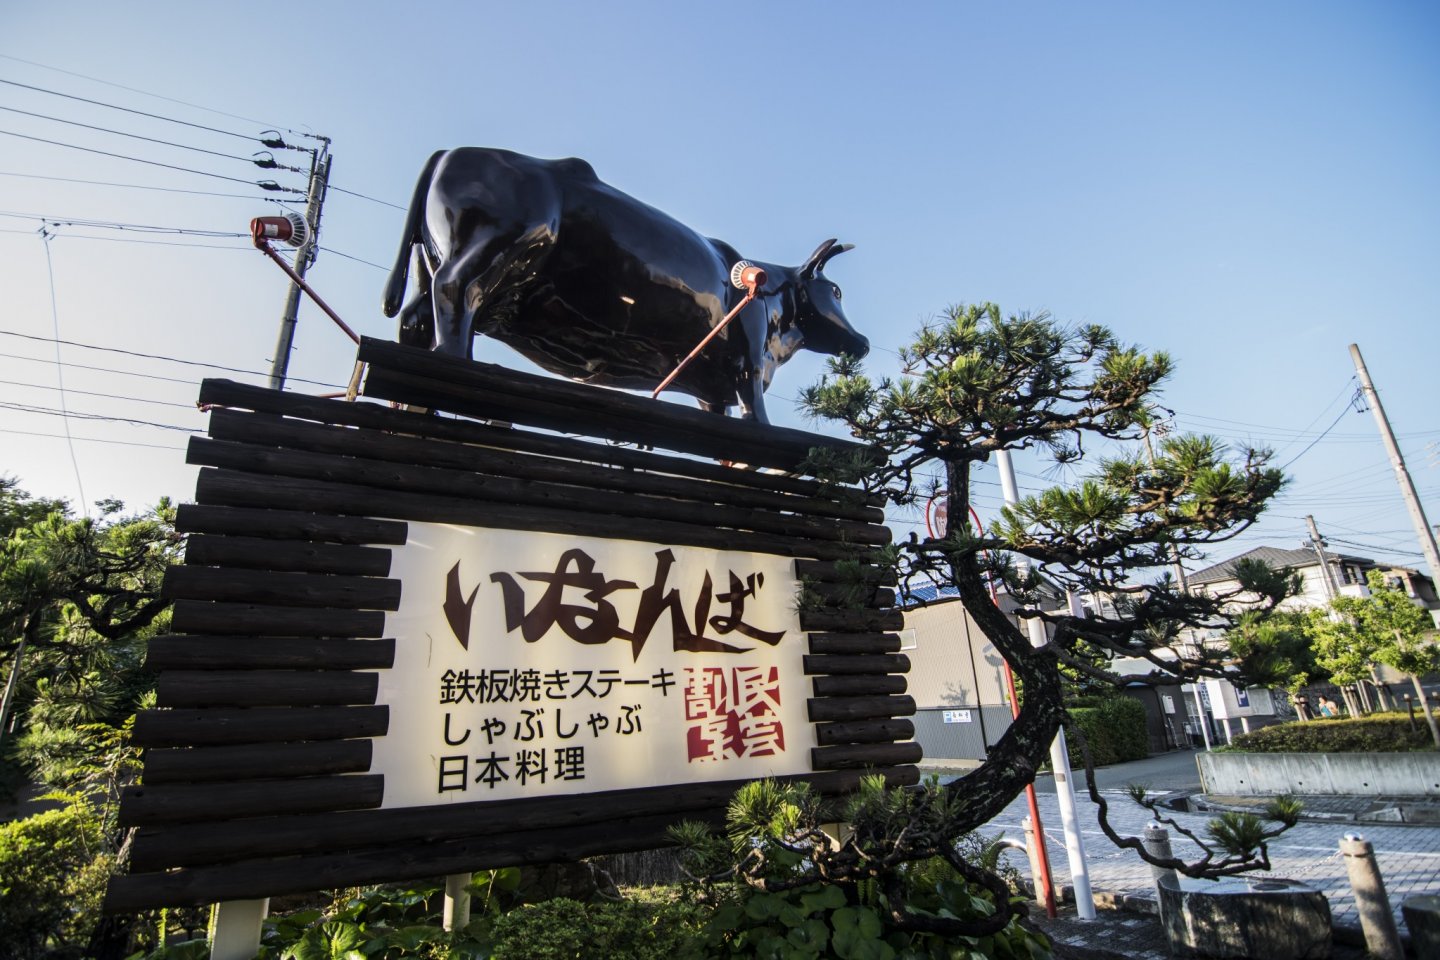 The statue of the cow atop Inanba's signboard. They really are serious about their beef.